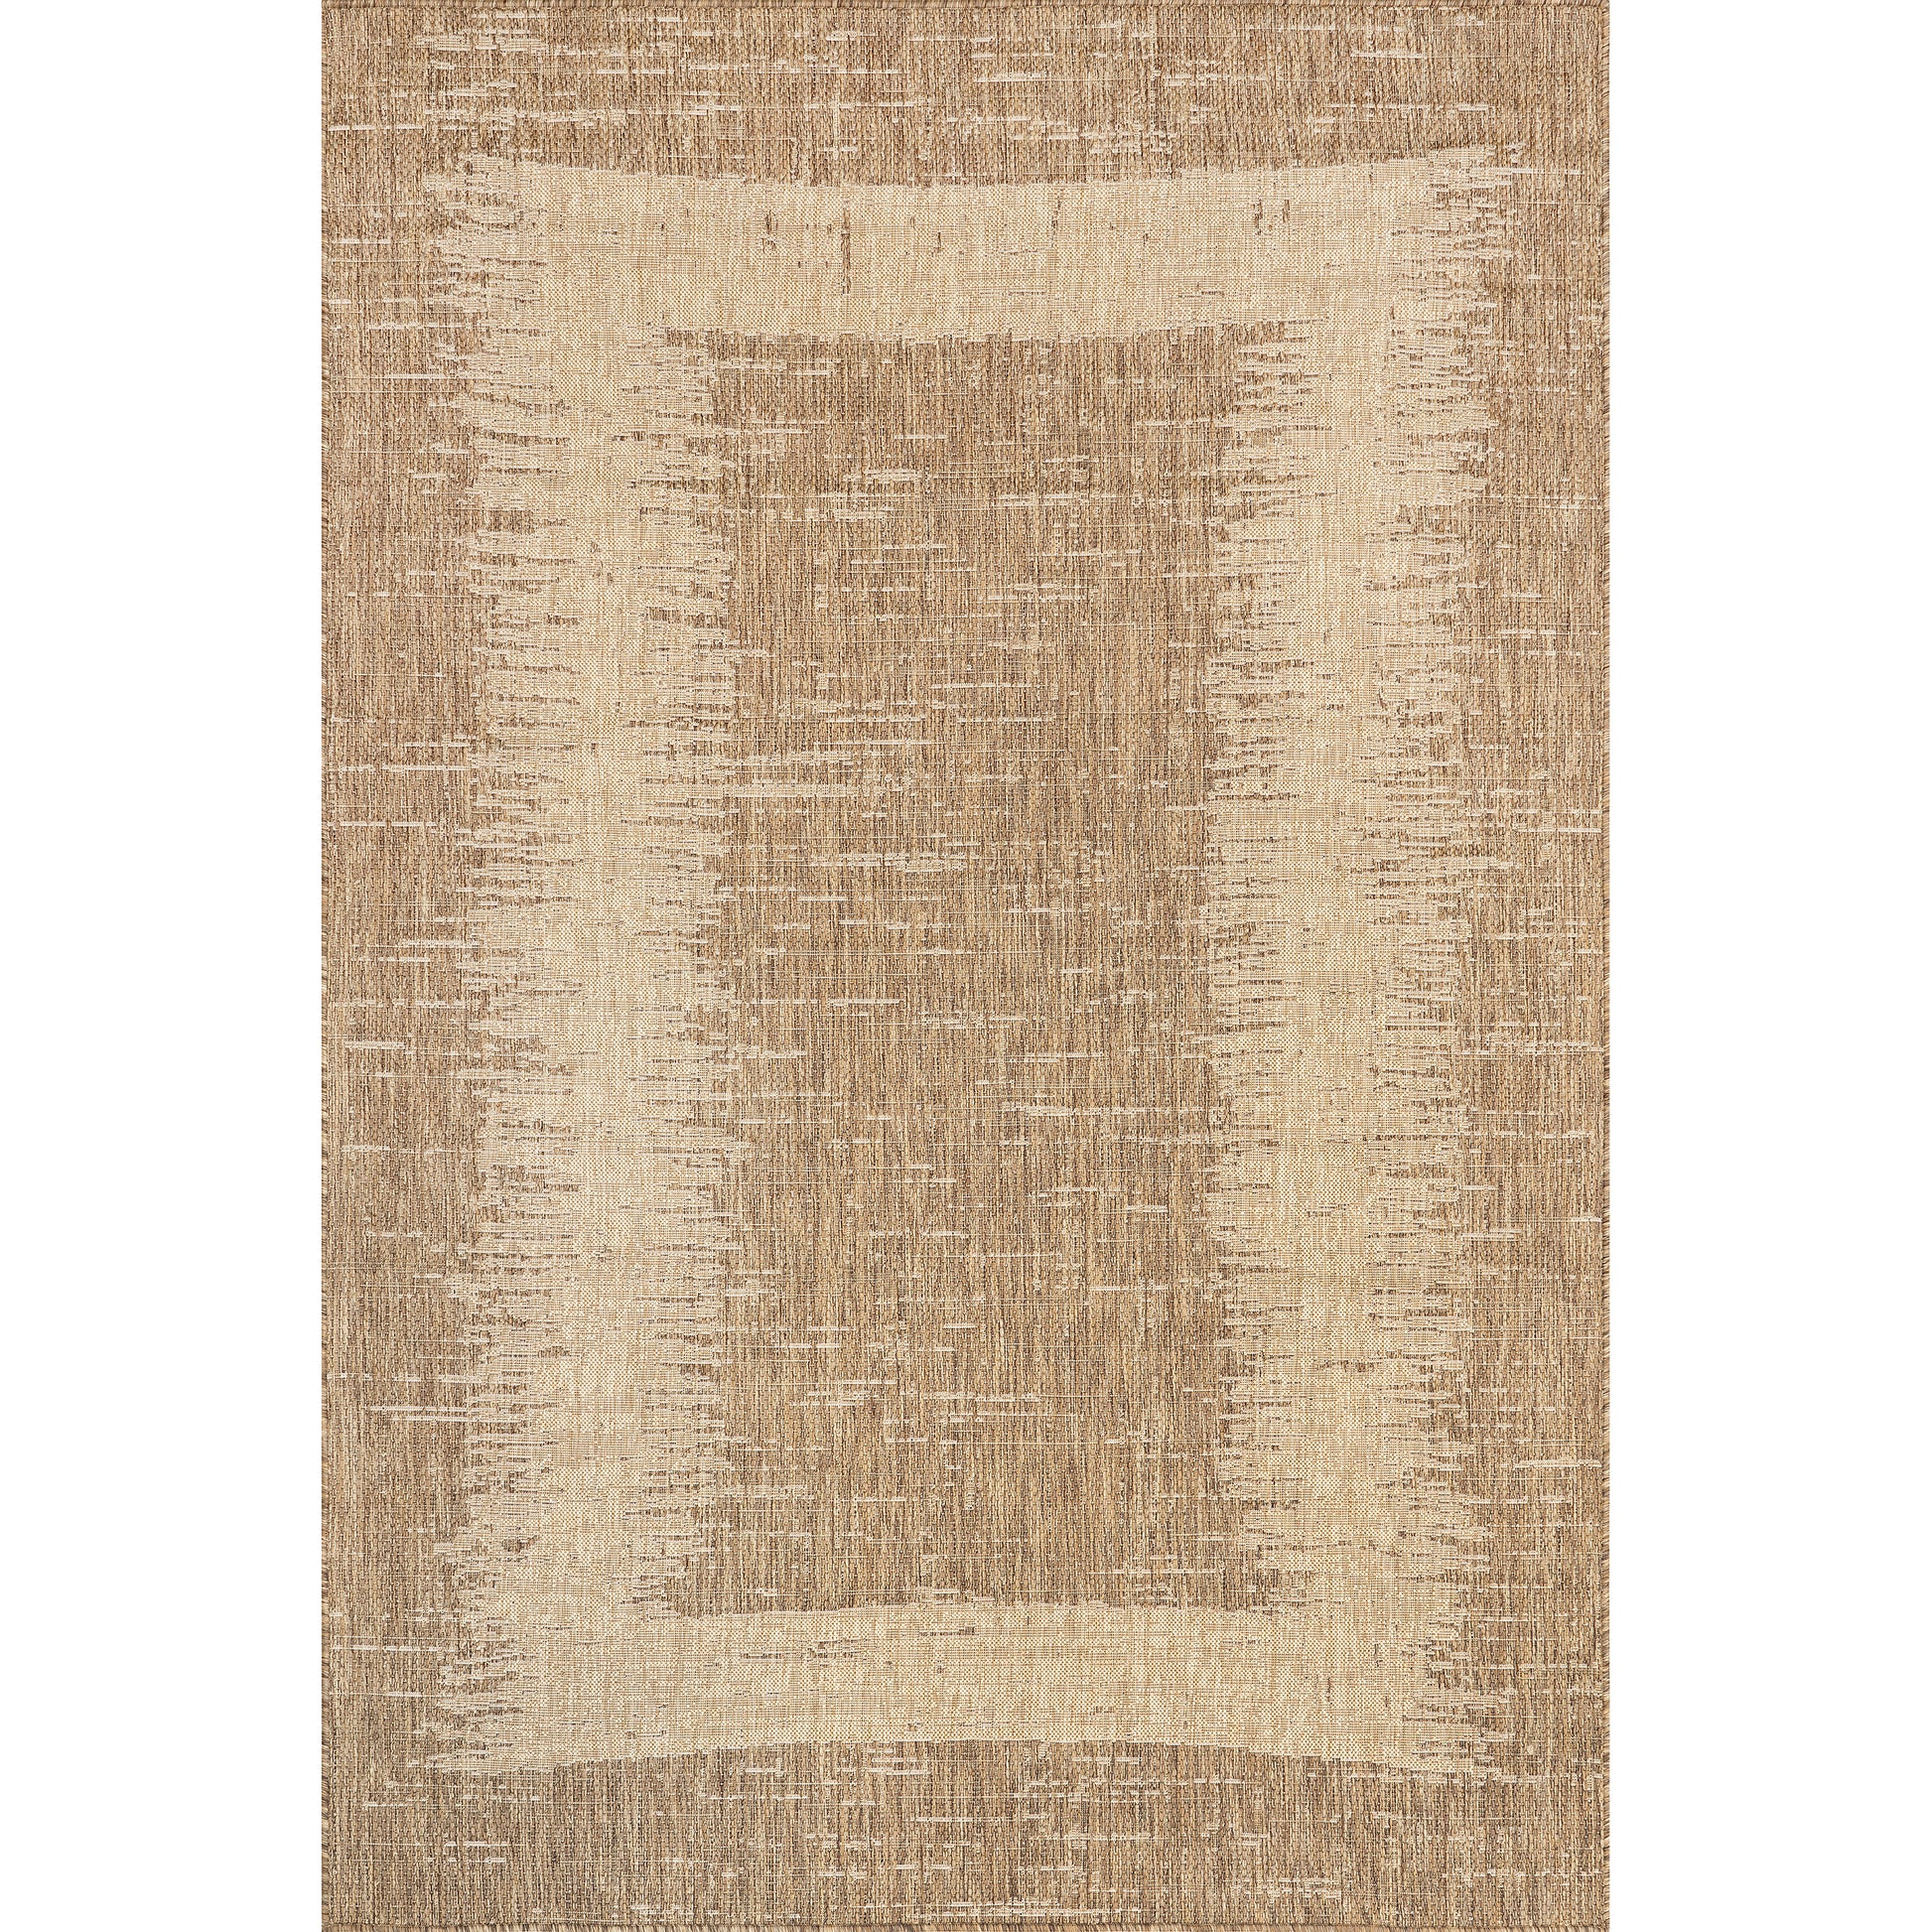 Nuloom Tami Transitional Square Nta1823A Beige Area Rug